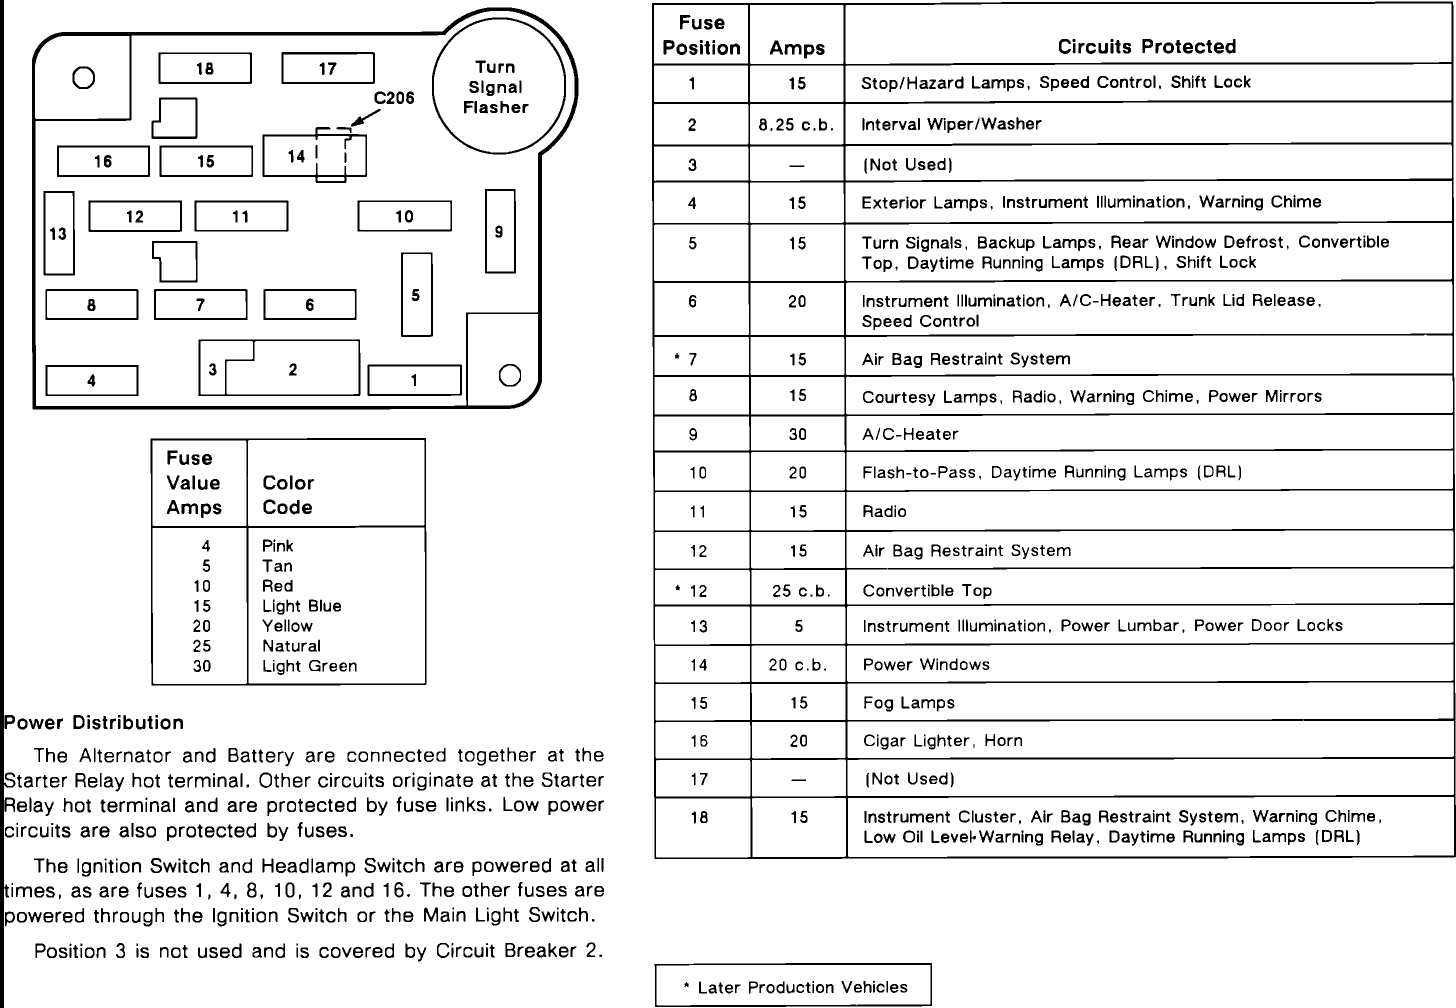 Ford fuse schematic